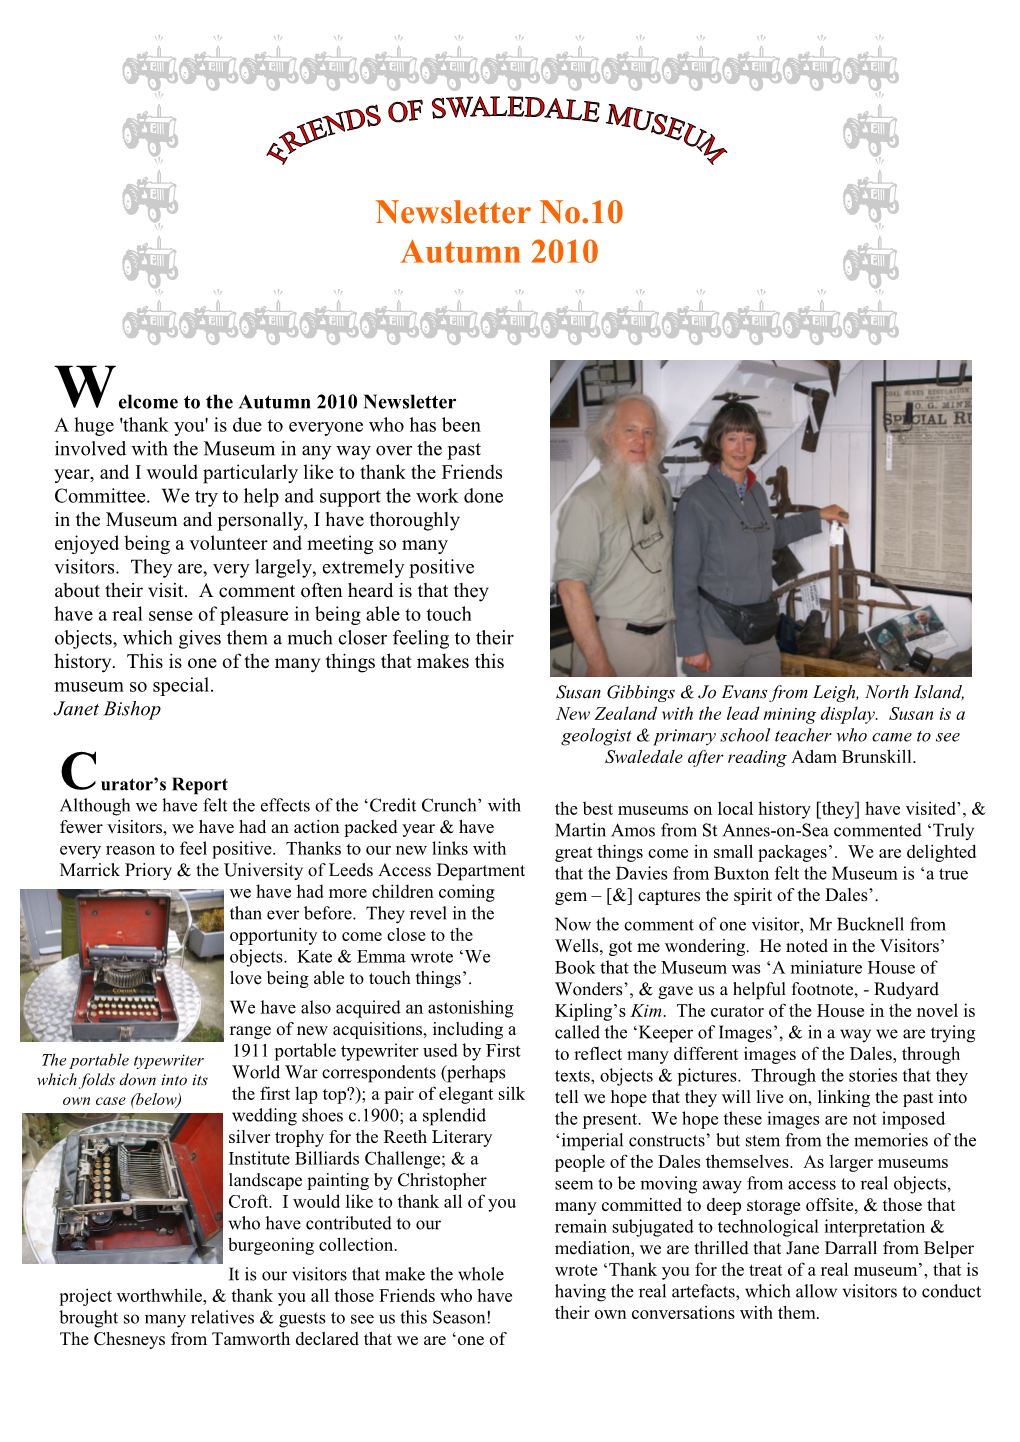 W Elcome to the Autumn 2010 Newsletter